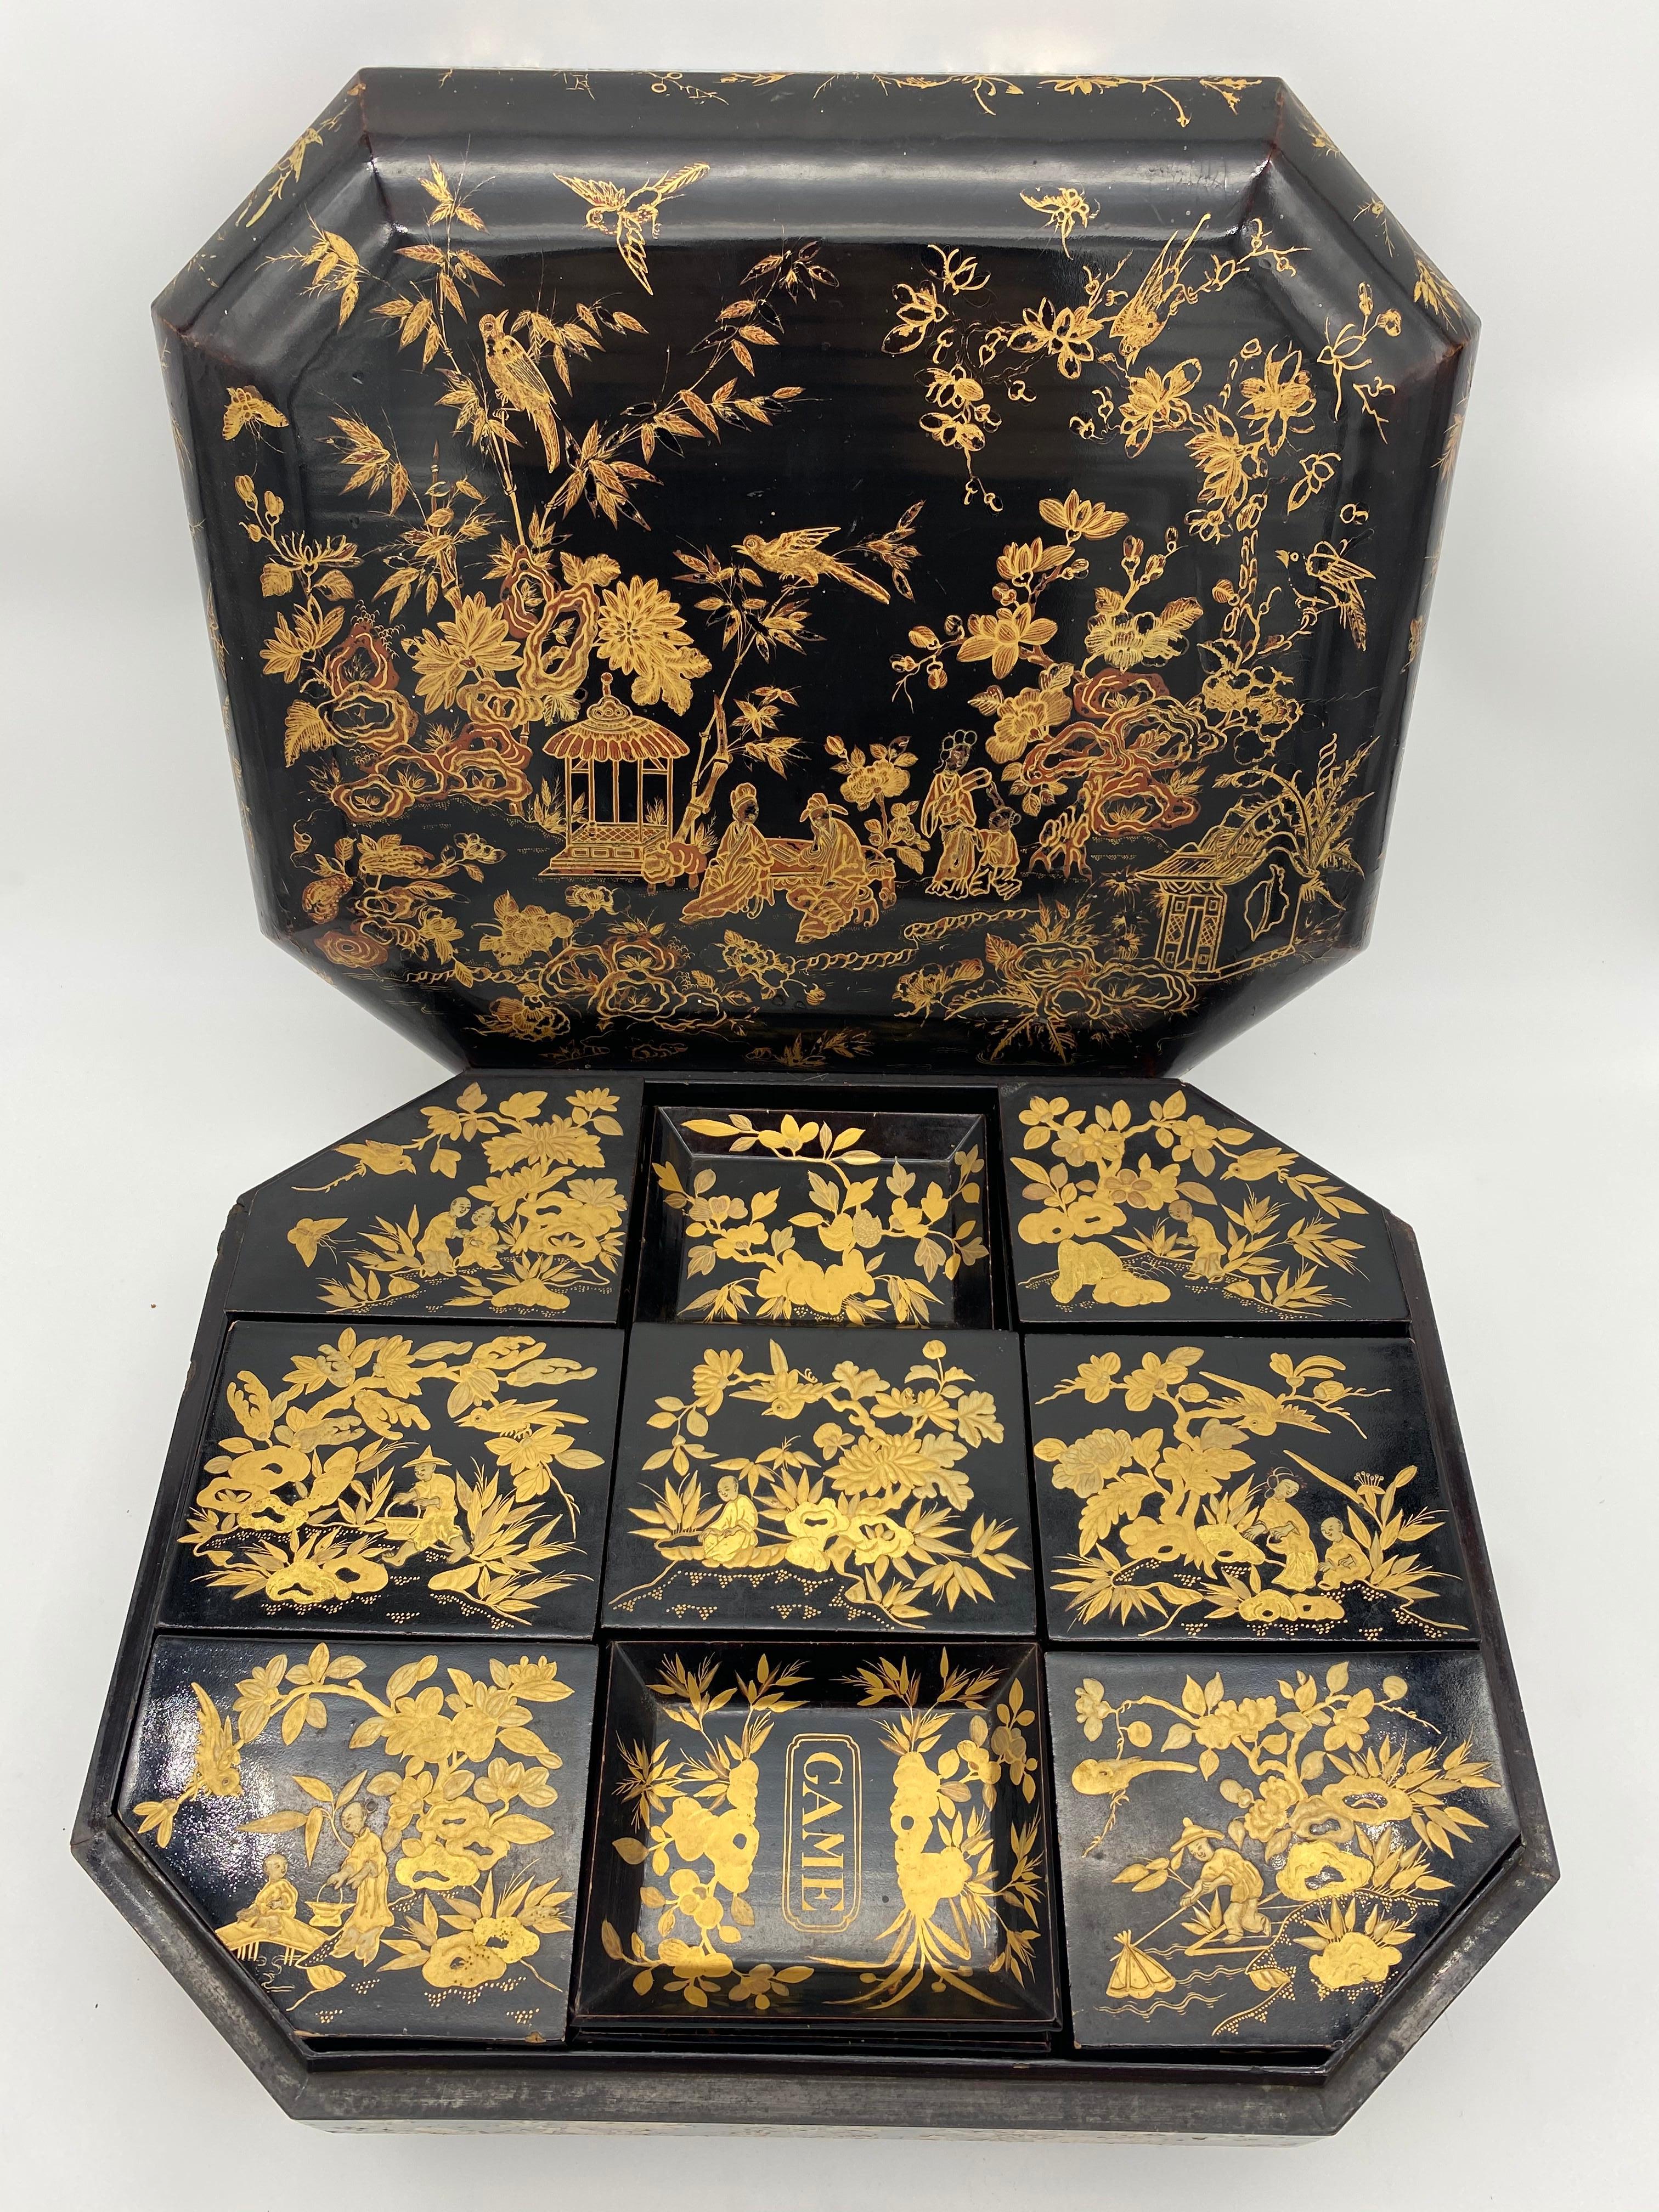 Hand-Painted Antique 18th Century Export Chinese Lacquer Gaming Box For Sale